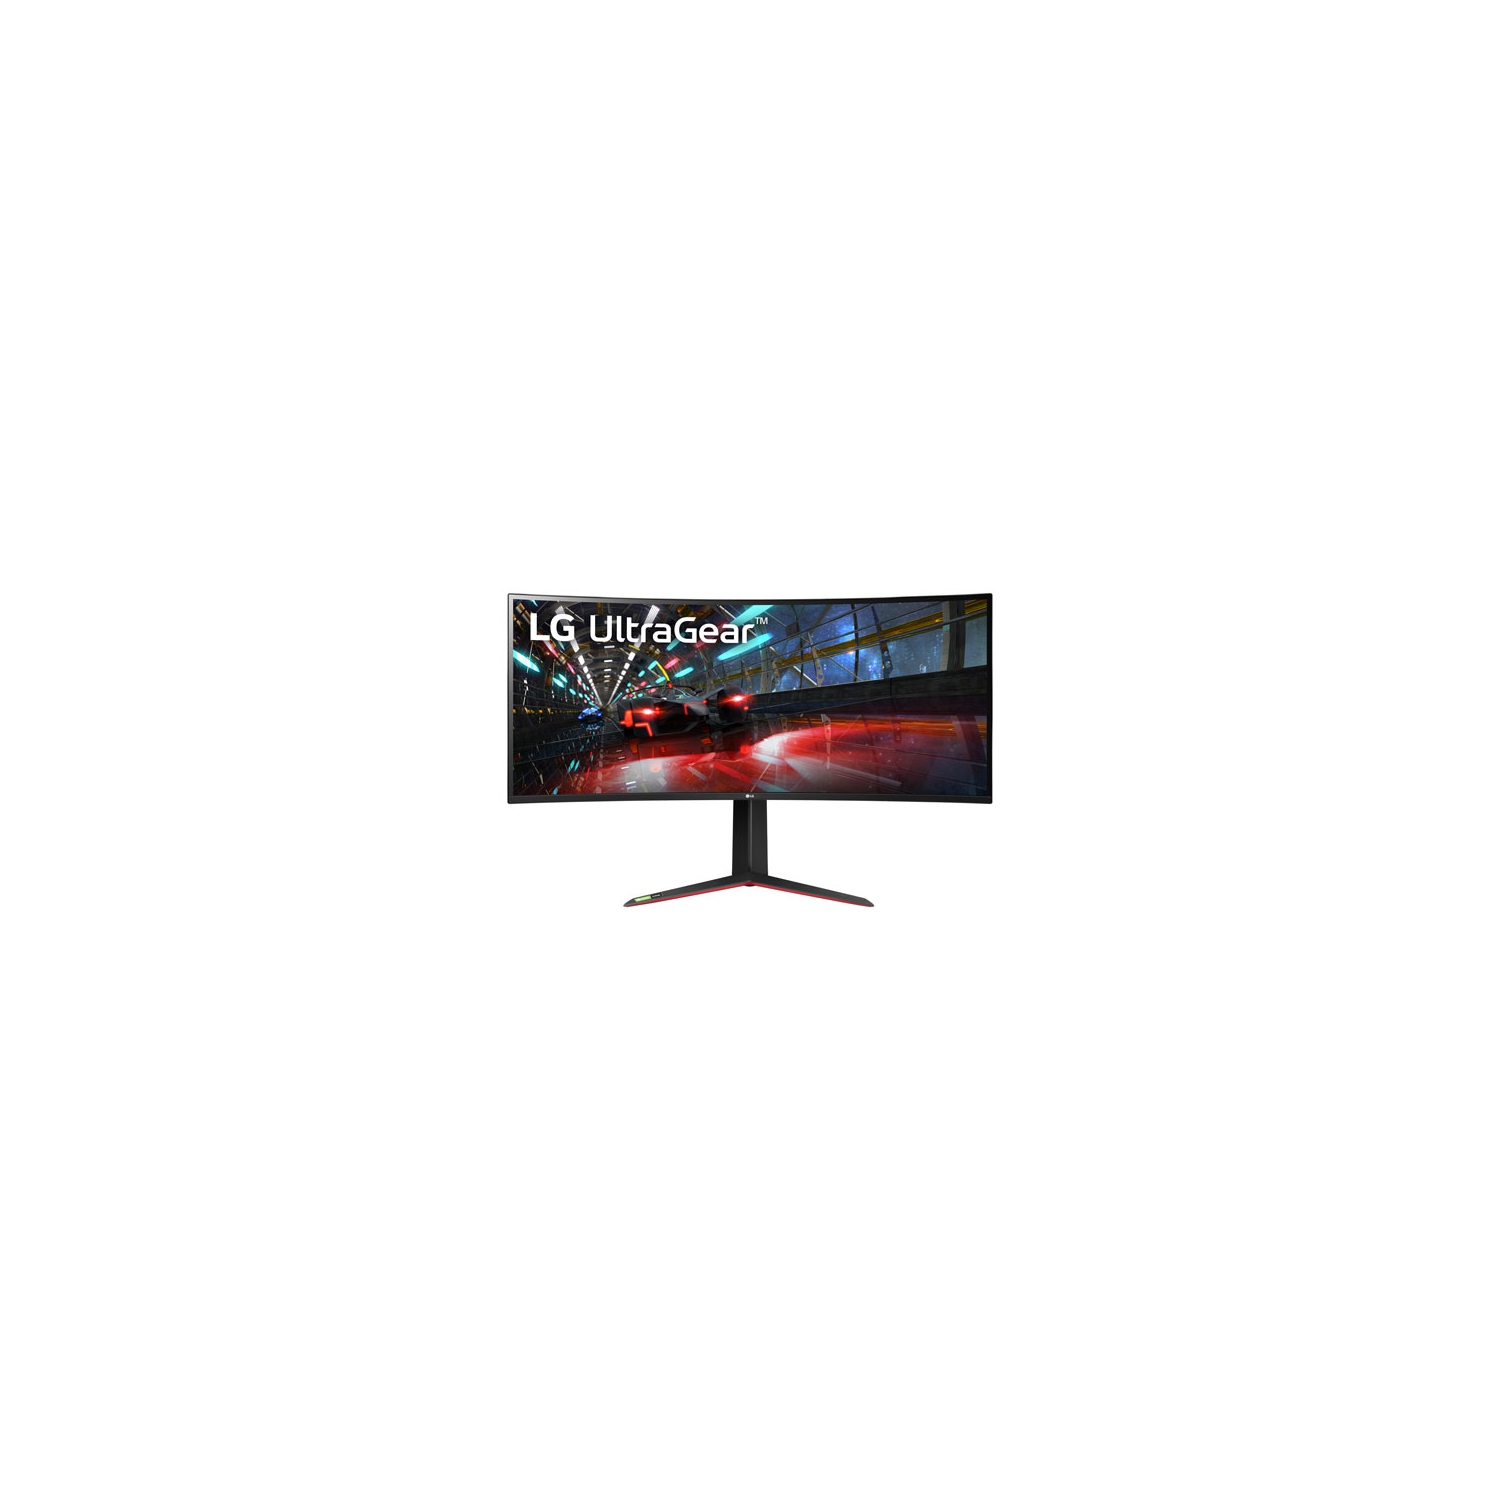 Refurbished (Excellent) - LG UltraGear 37.5" 1440p WQHD 144Hz 1ms GTG Curved IPS LED G-Sync FreeSync Gaming Monitor (38GN950-B)